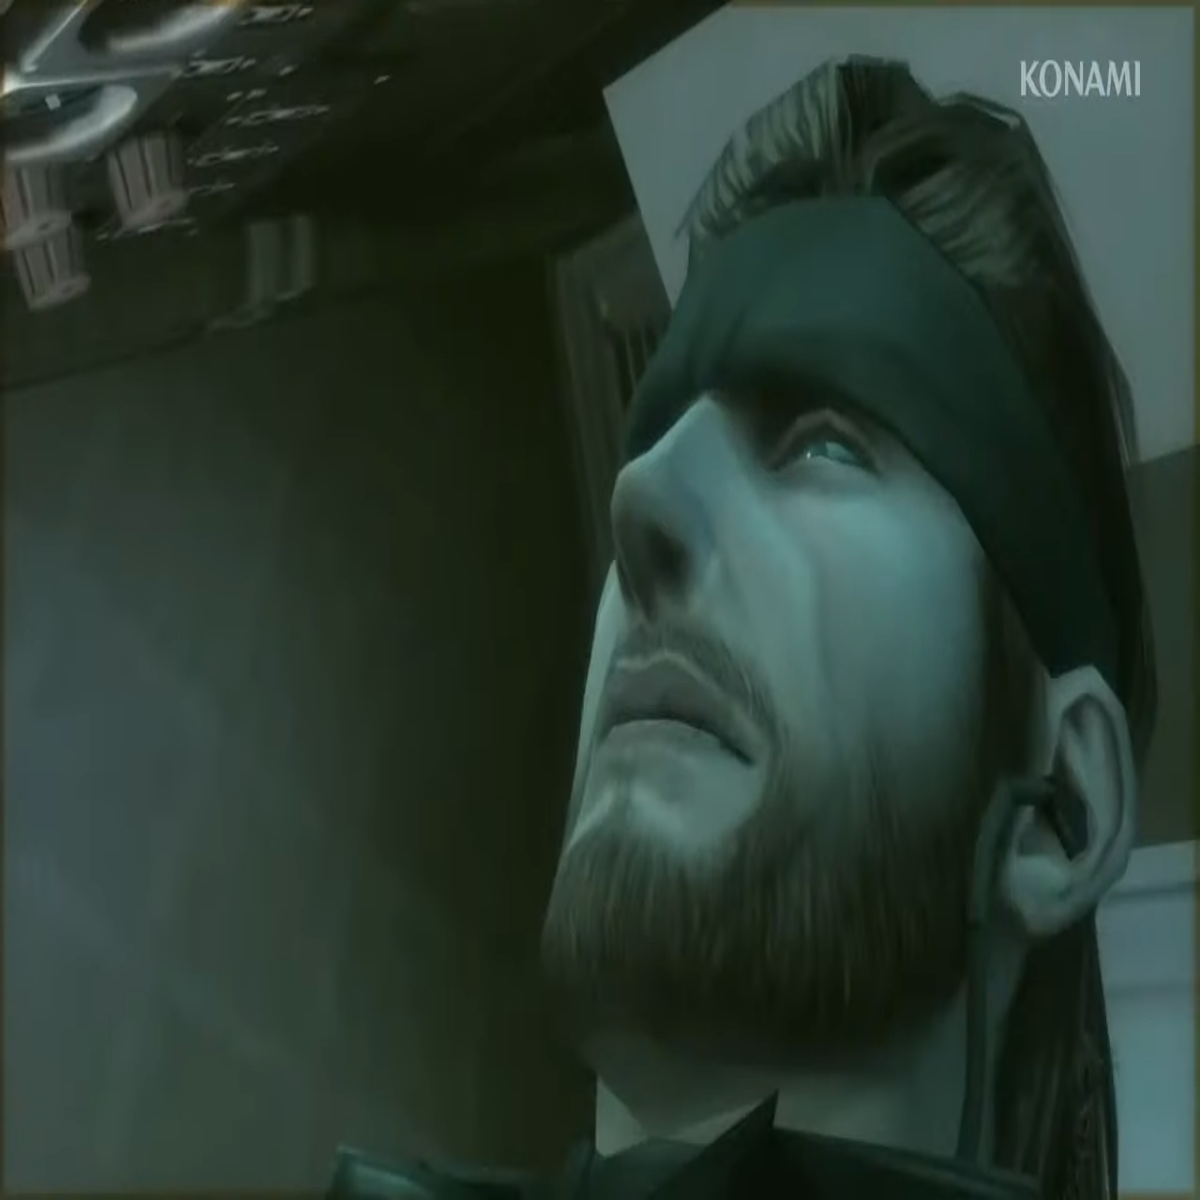 One of the things that bothers me about Metal Gear 2: Solid Snake